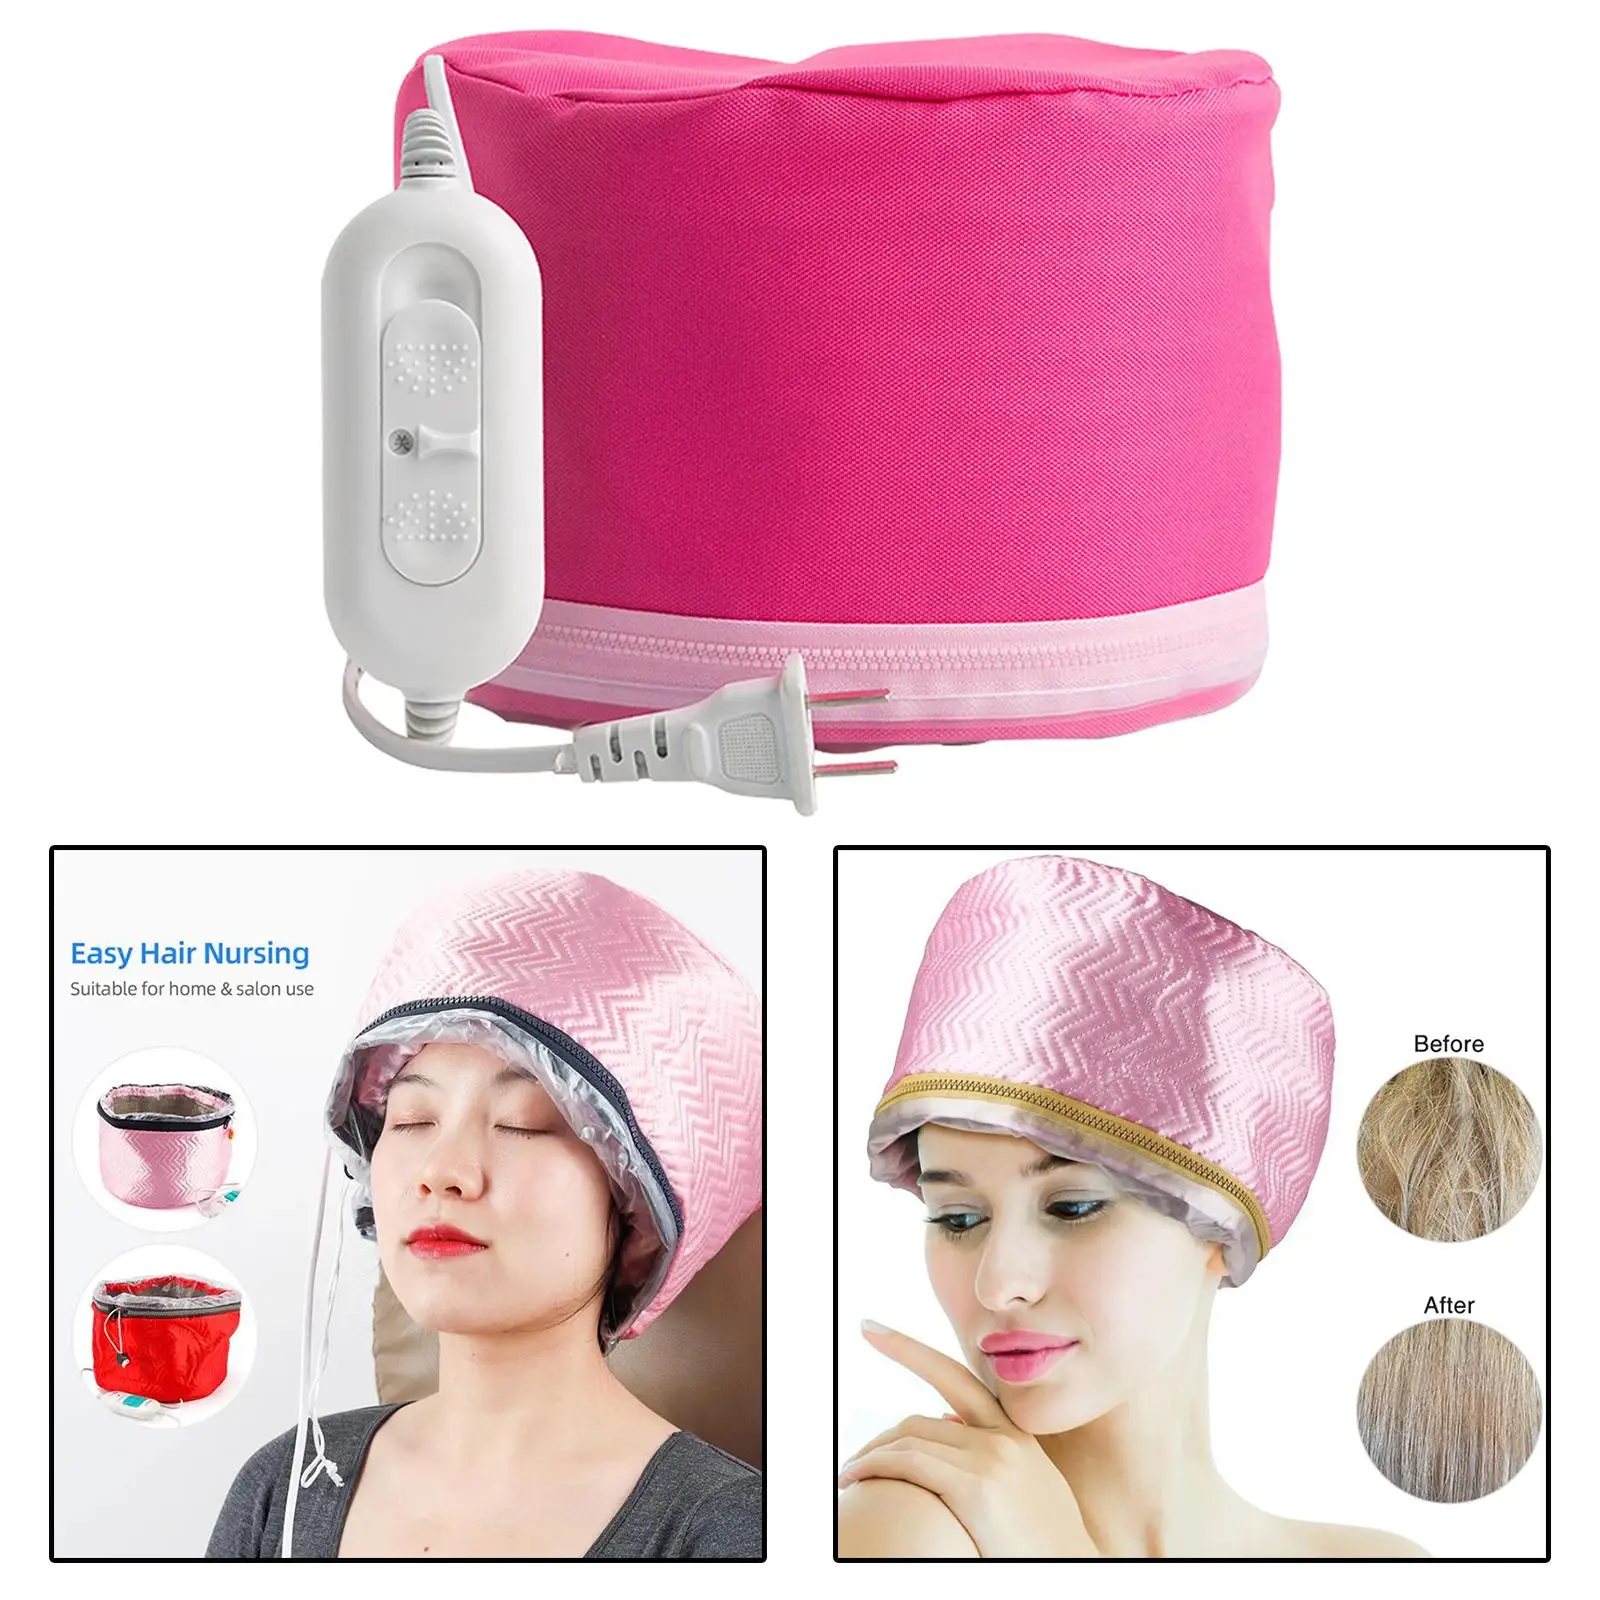 Hair Heating Caps Steamer 3-Mode Adjustable Size Electric Essential Oil Caps for Deep Conditioning Salon Hair Scalp Natural Hair